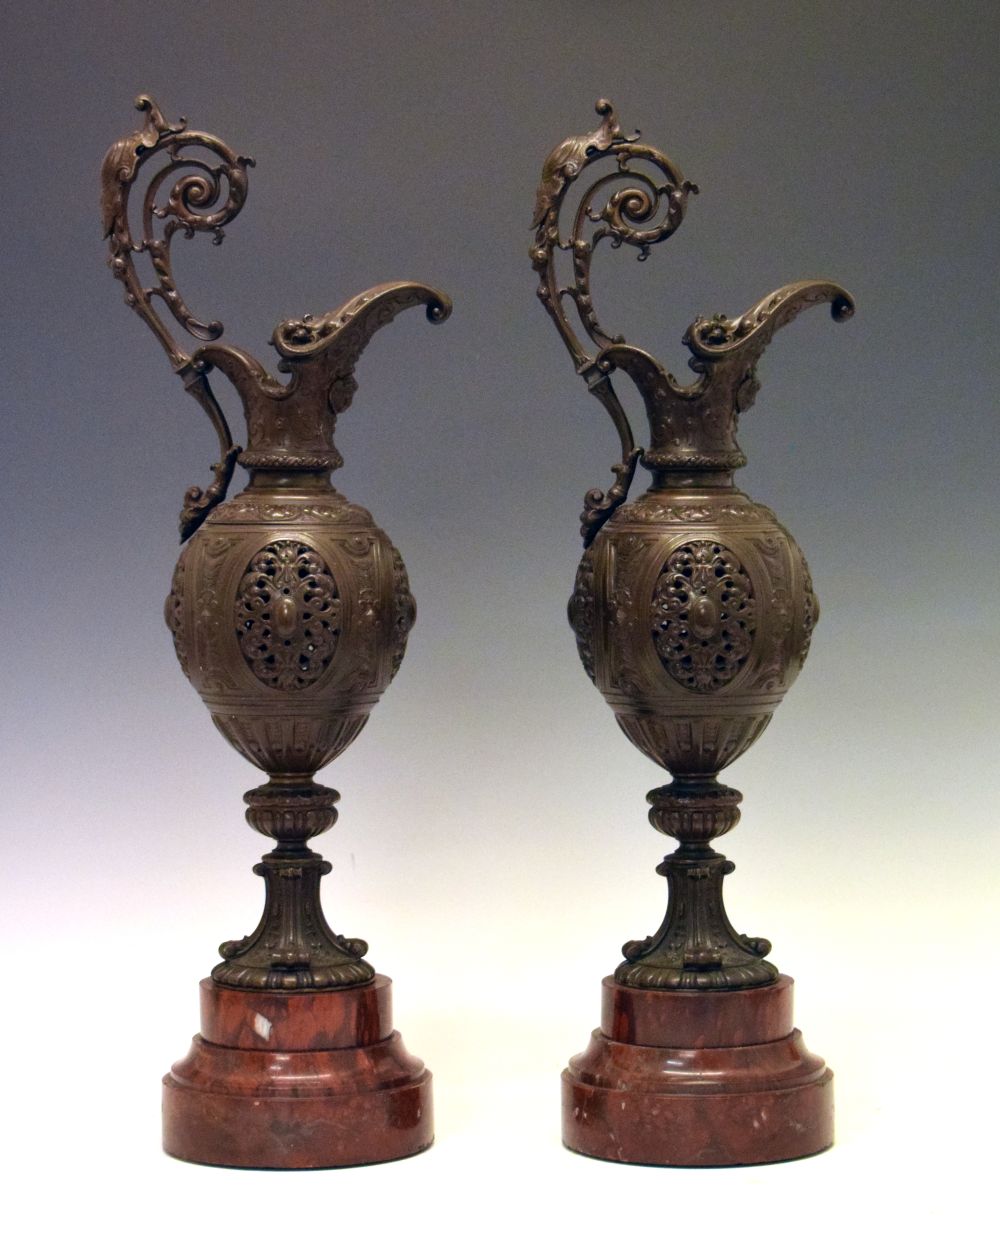 Pair of Renaissance Art revival patinated bronze ewers, each of pierced ovoid form with scroll